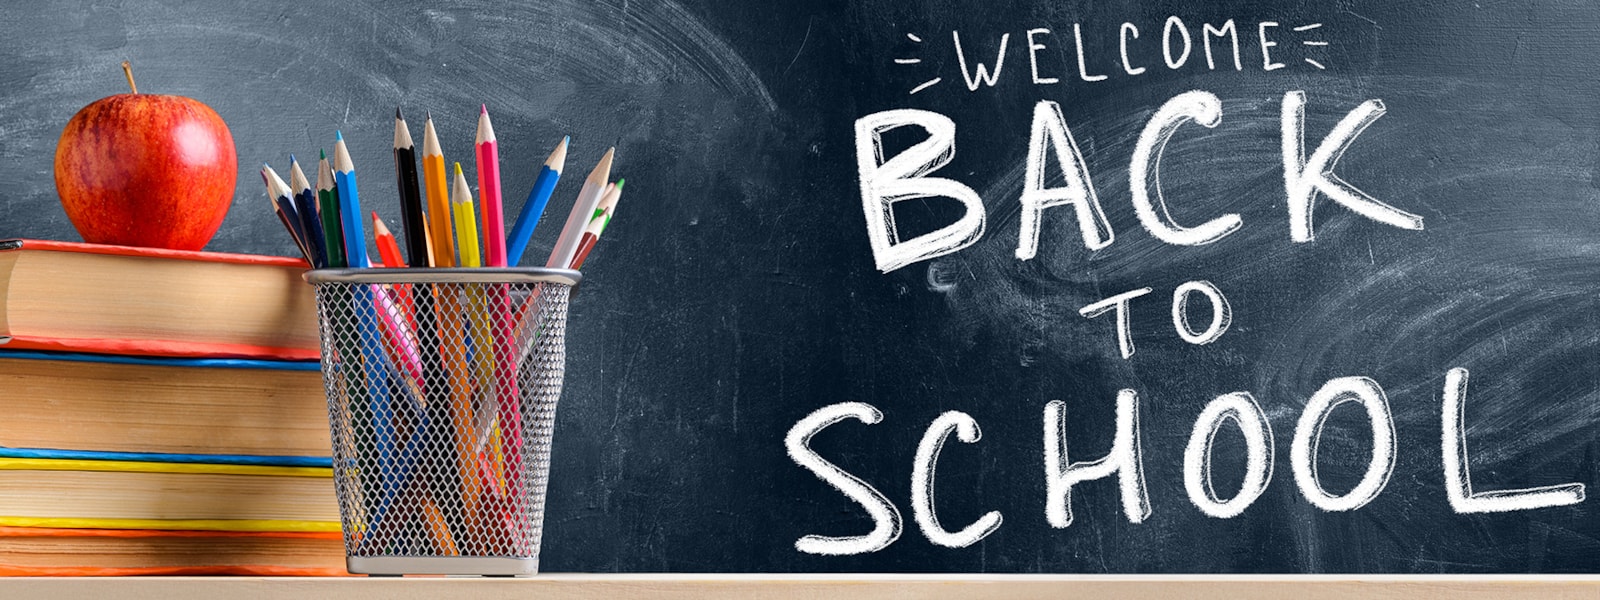 Back to school ABC and supplies